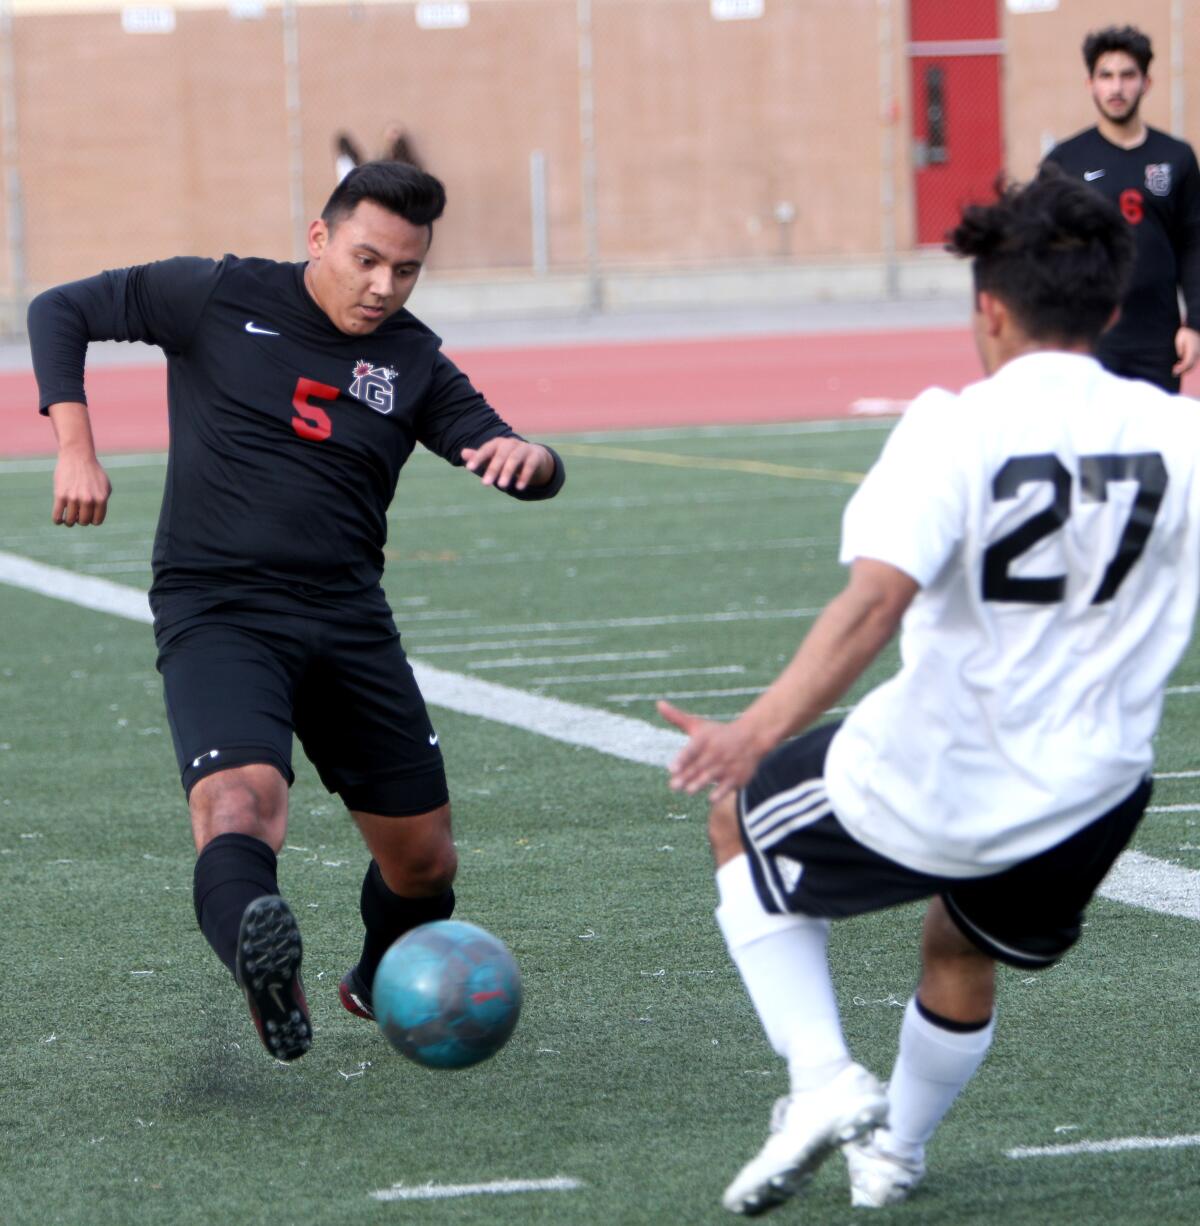 Glendale High School soccer player Elijah Cruz clears the ball in game vs. Burroughs High at home in Glendale on Tuesday, Jan. 21, 2020.